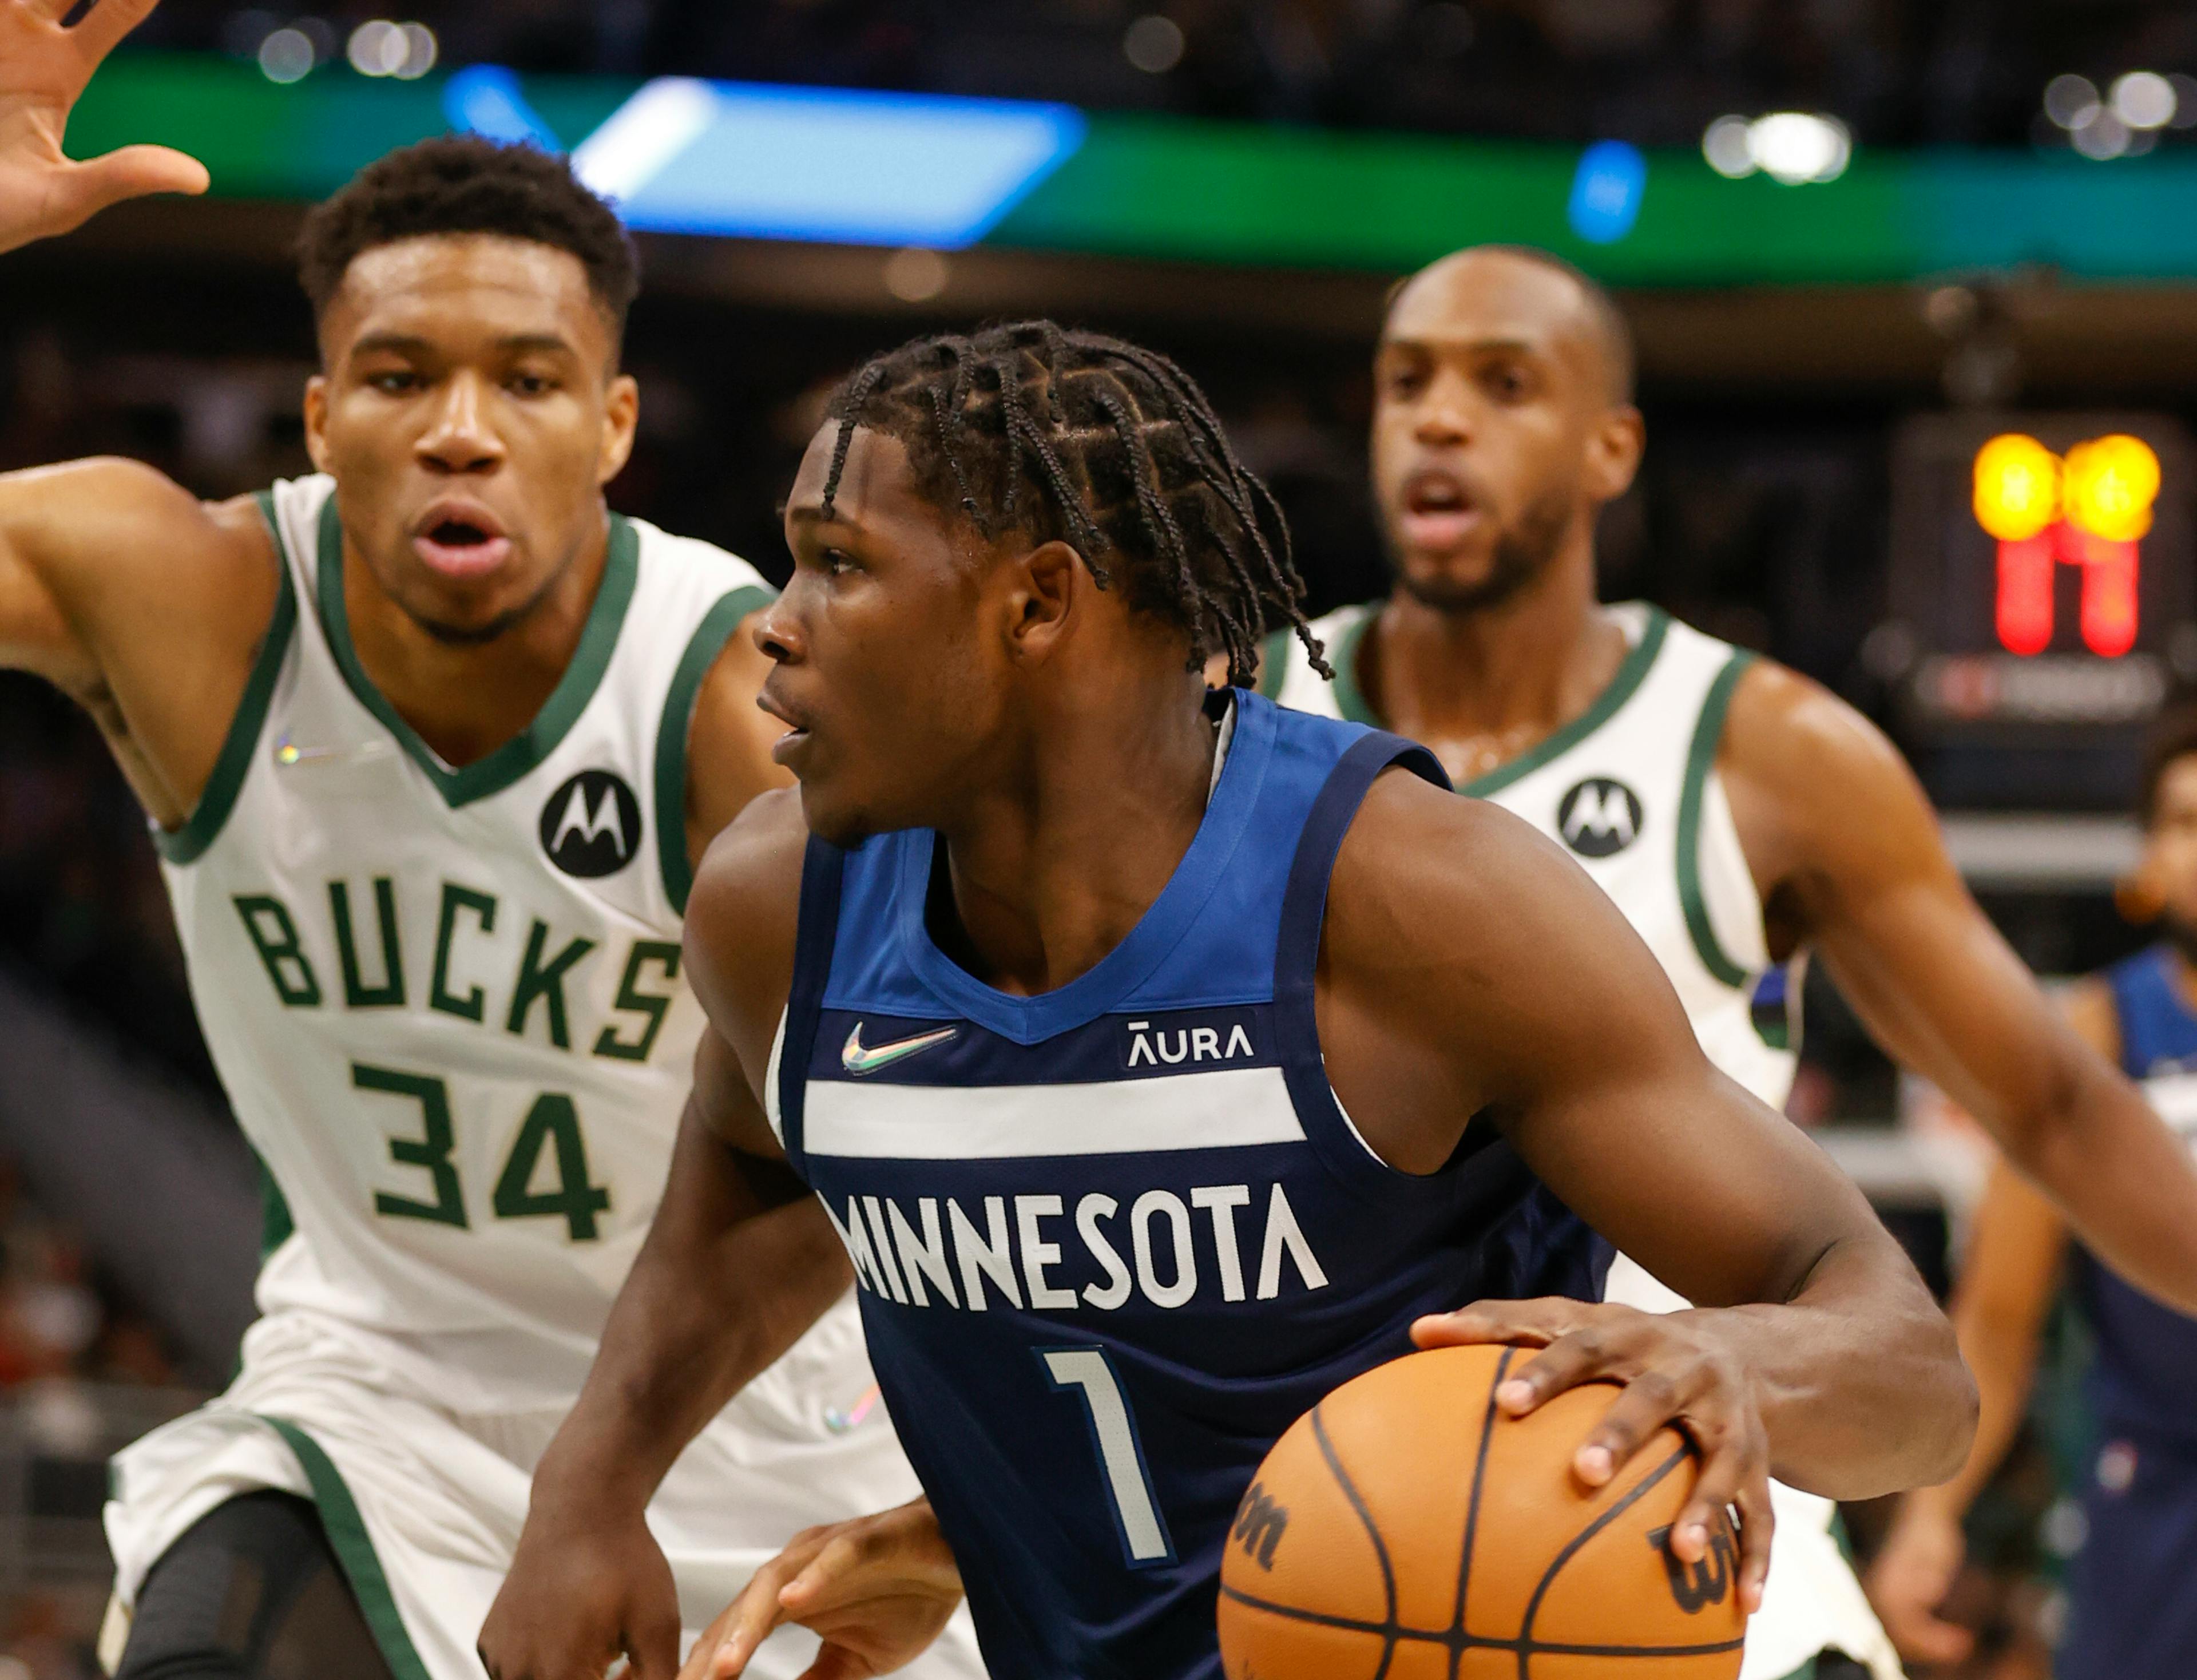 Meeting their challenge, Timberwolves hold off Bucks rally to beat defending NBA champs | Star Tribune